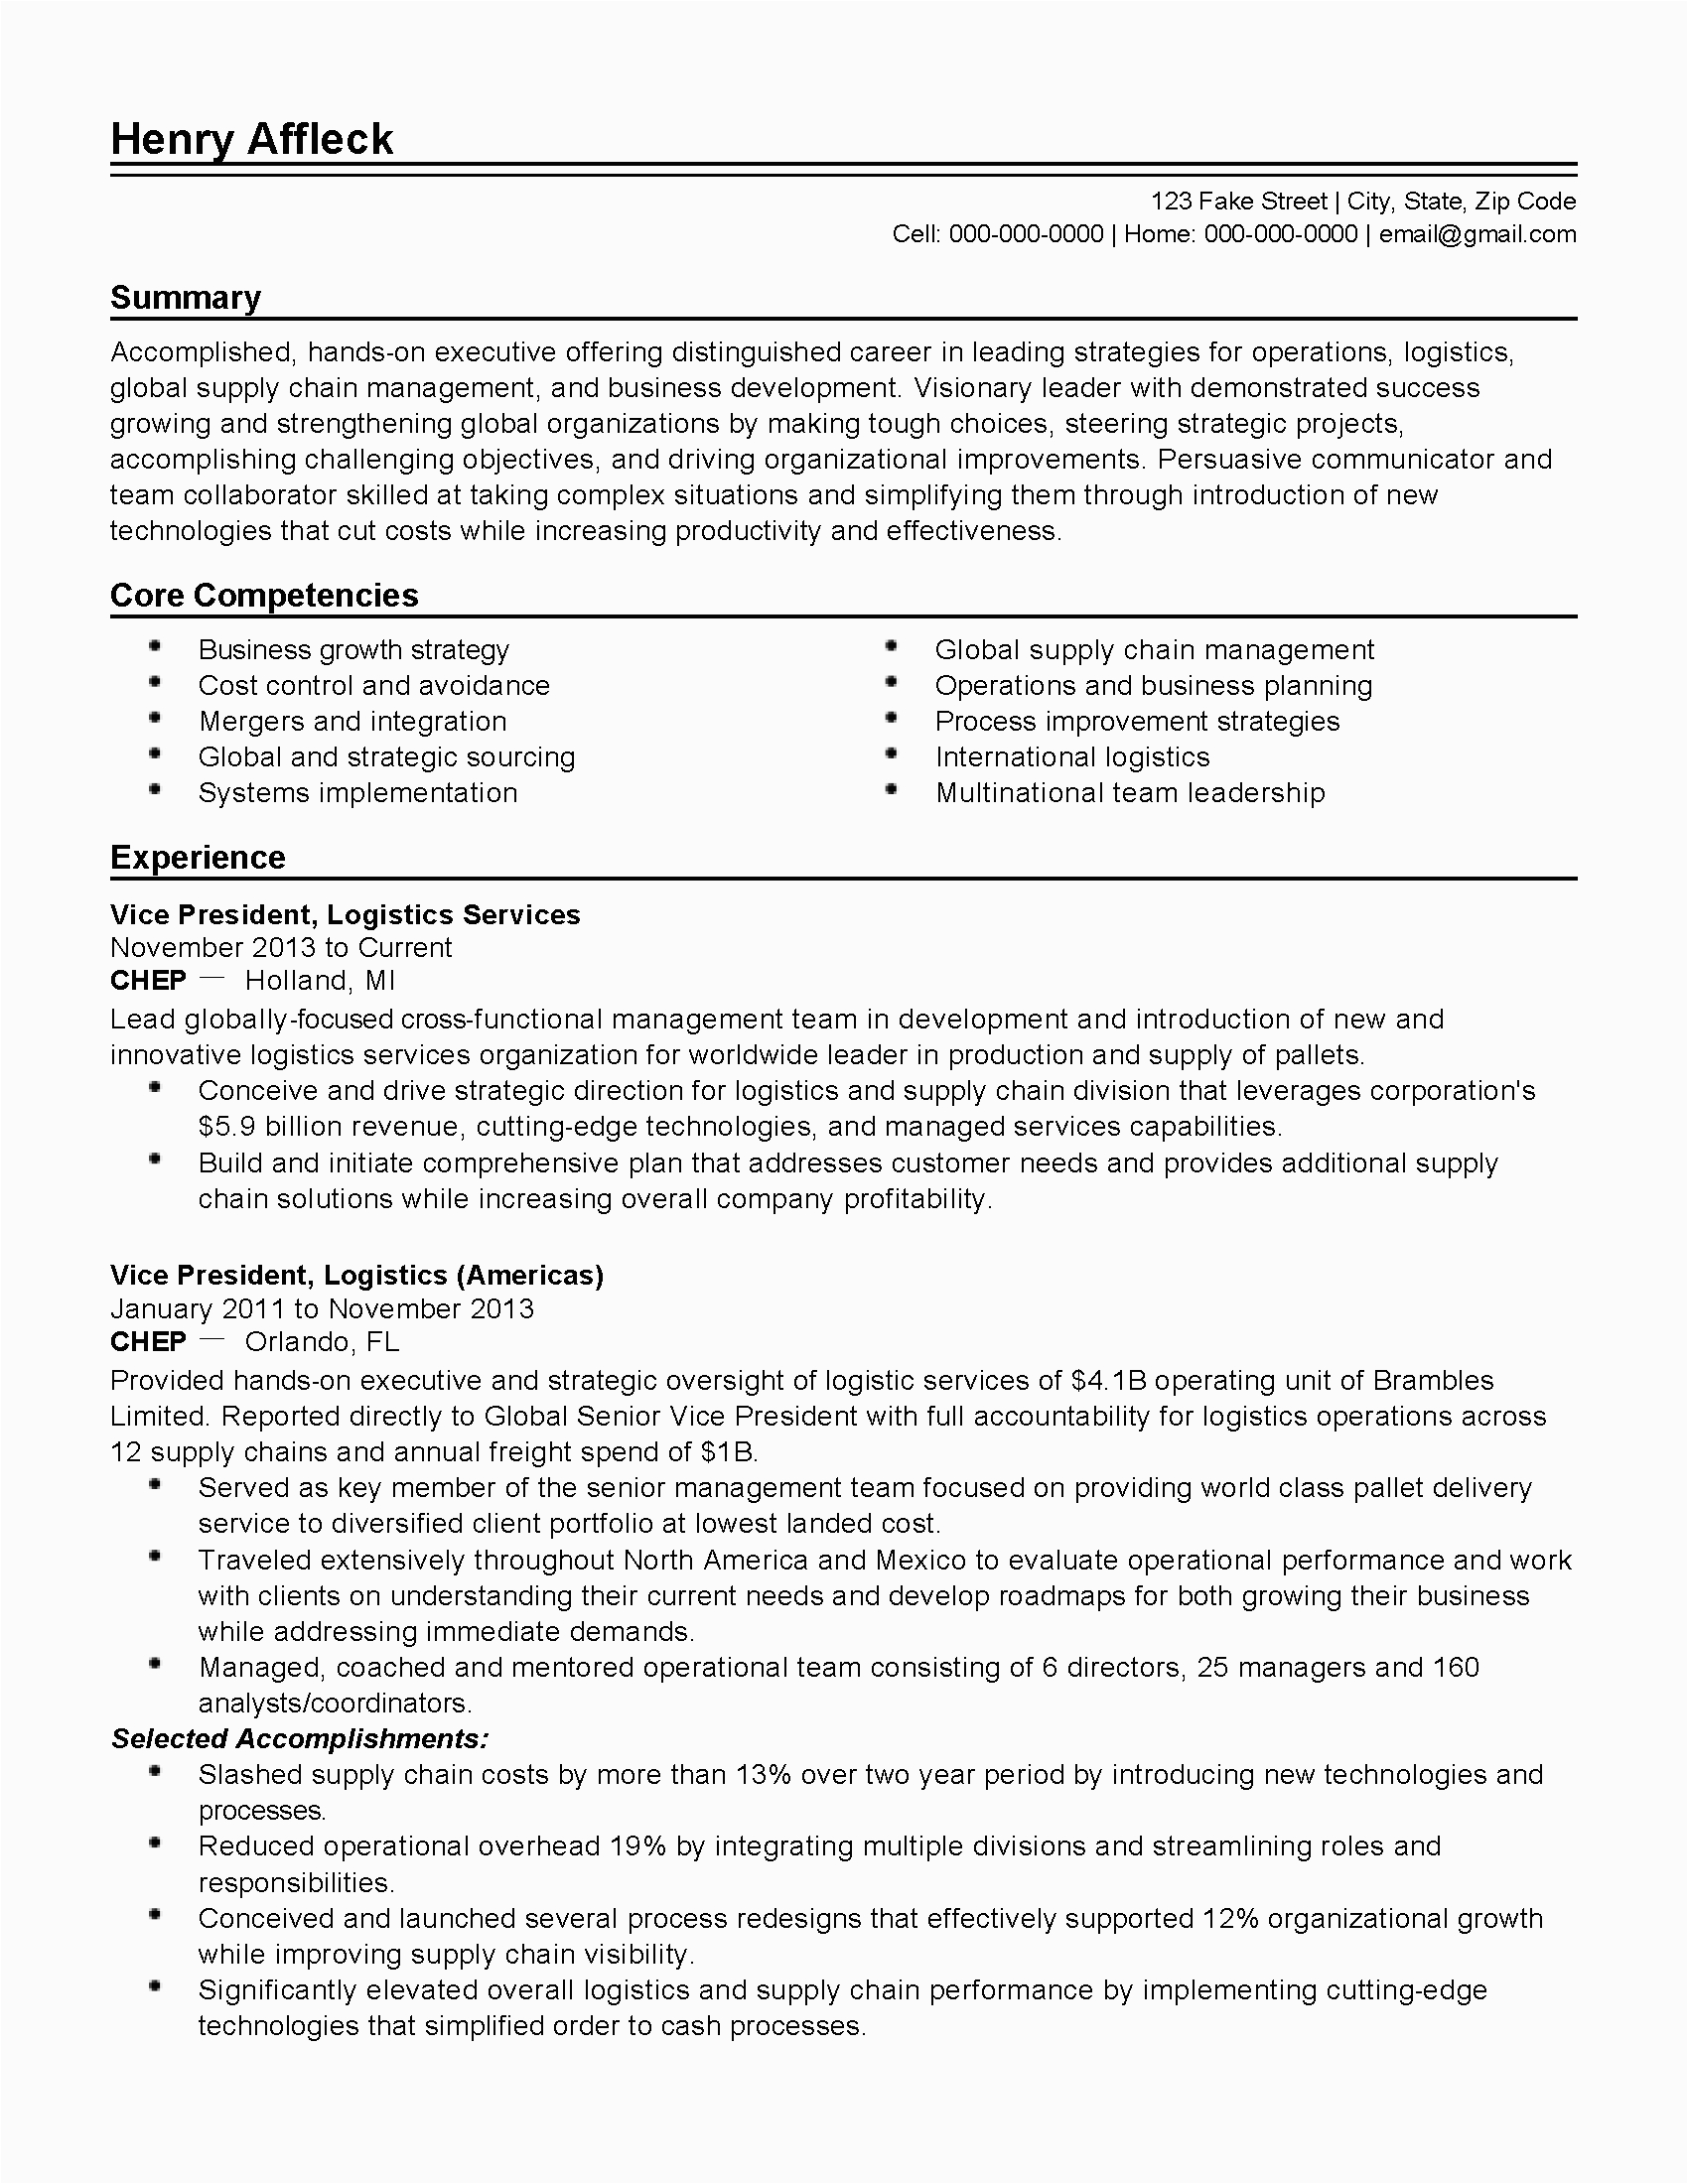 Sample Resume for Supply Chain Executive Professional Global Supply Chain Manager Templates to